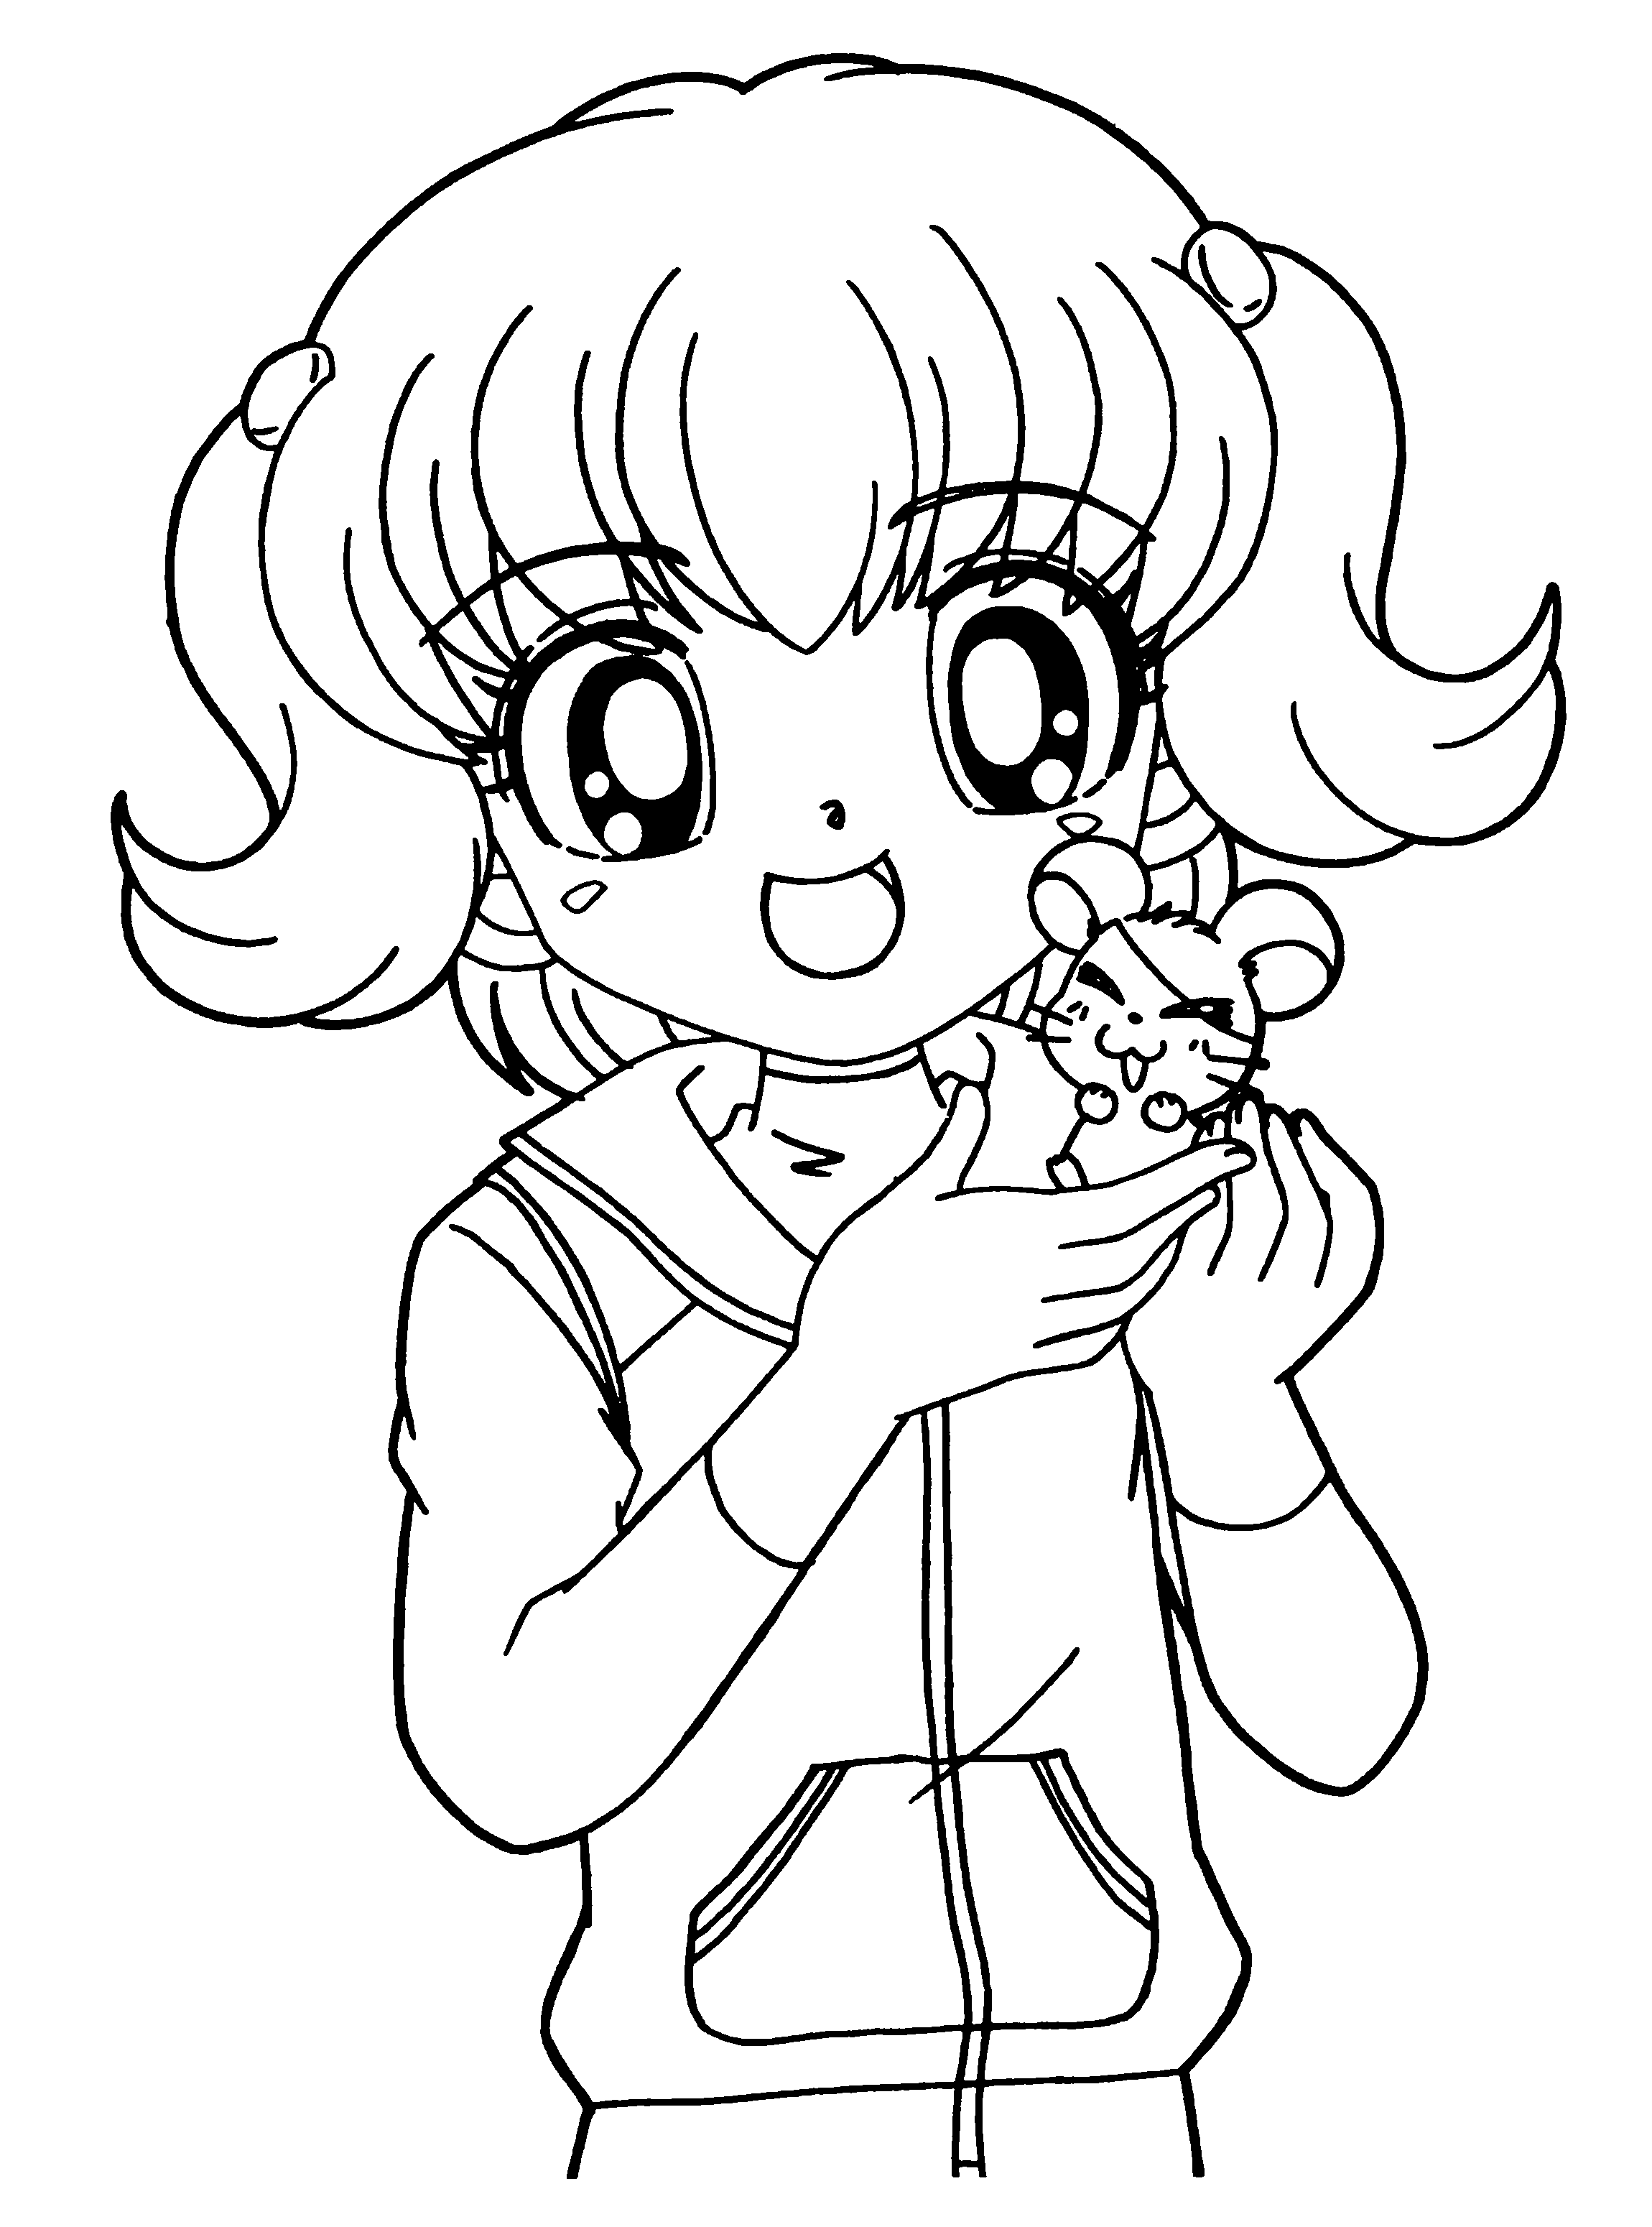 cute anime coloring pages to print anime coloring pages best coloring pages for kids anime pages cute coloring print to 